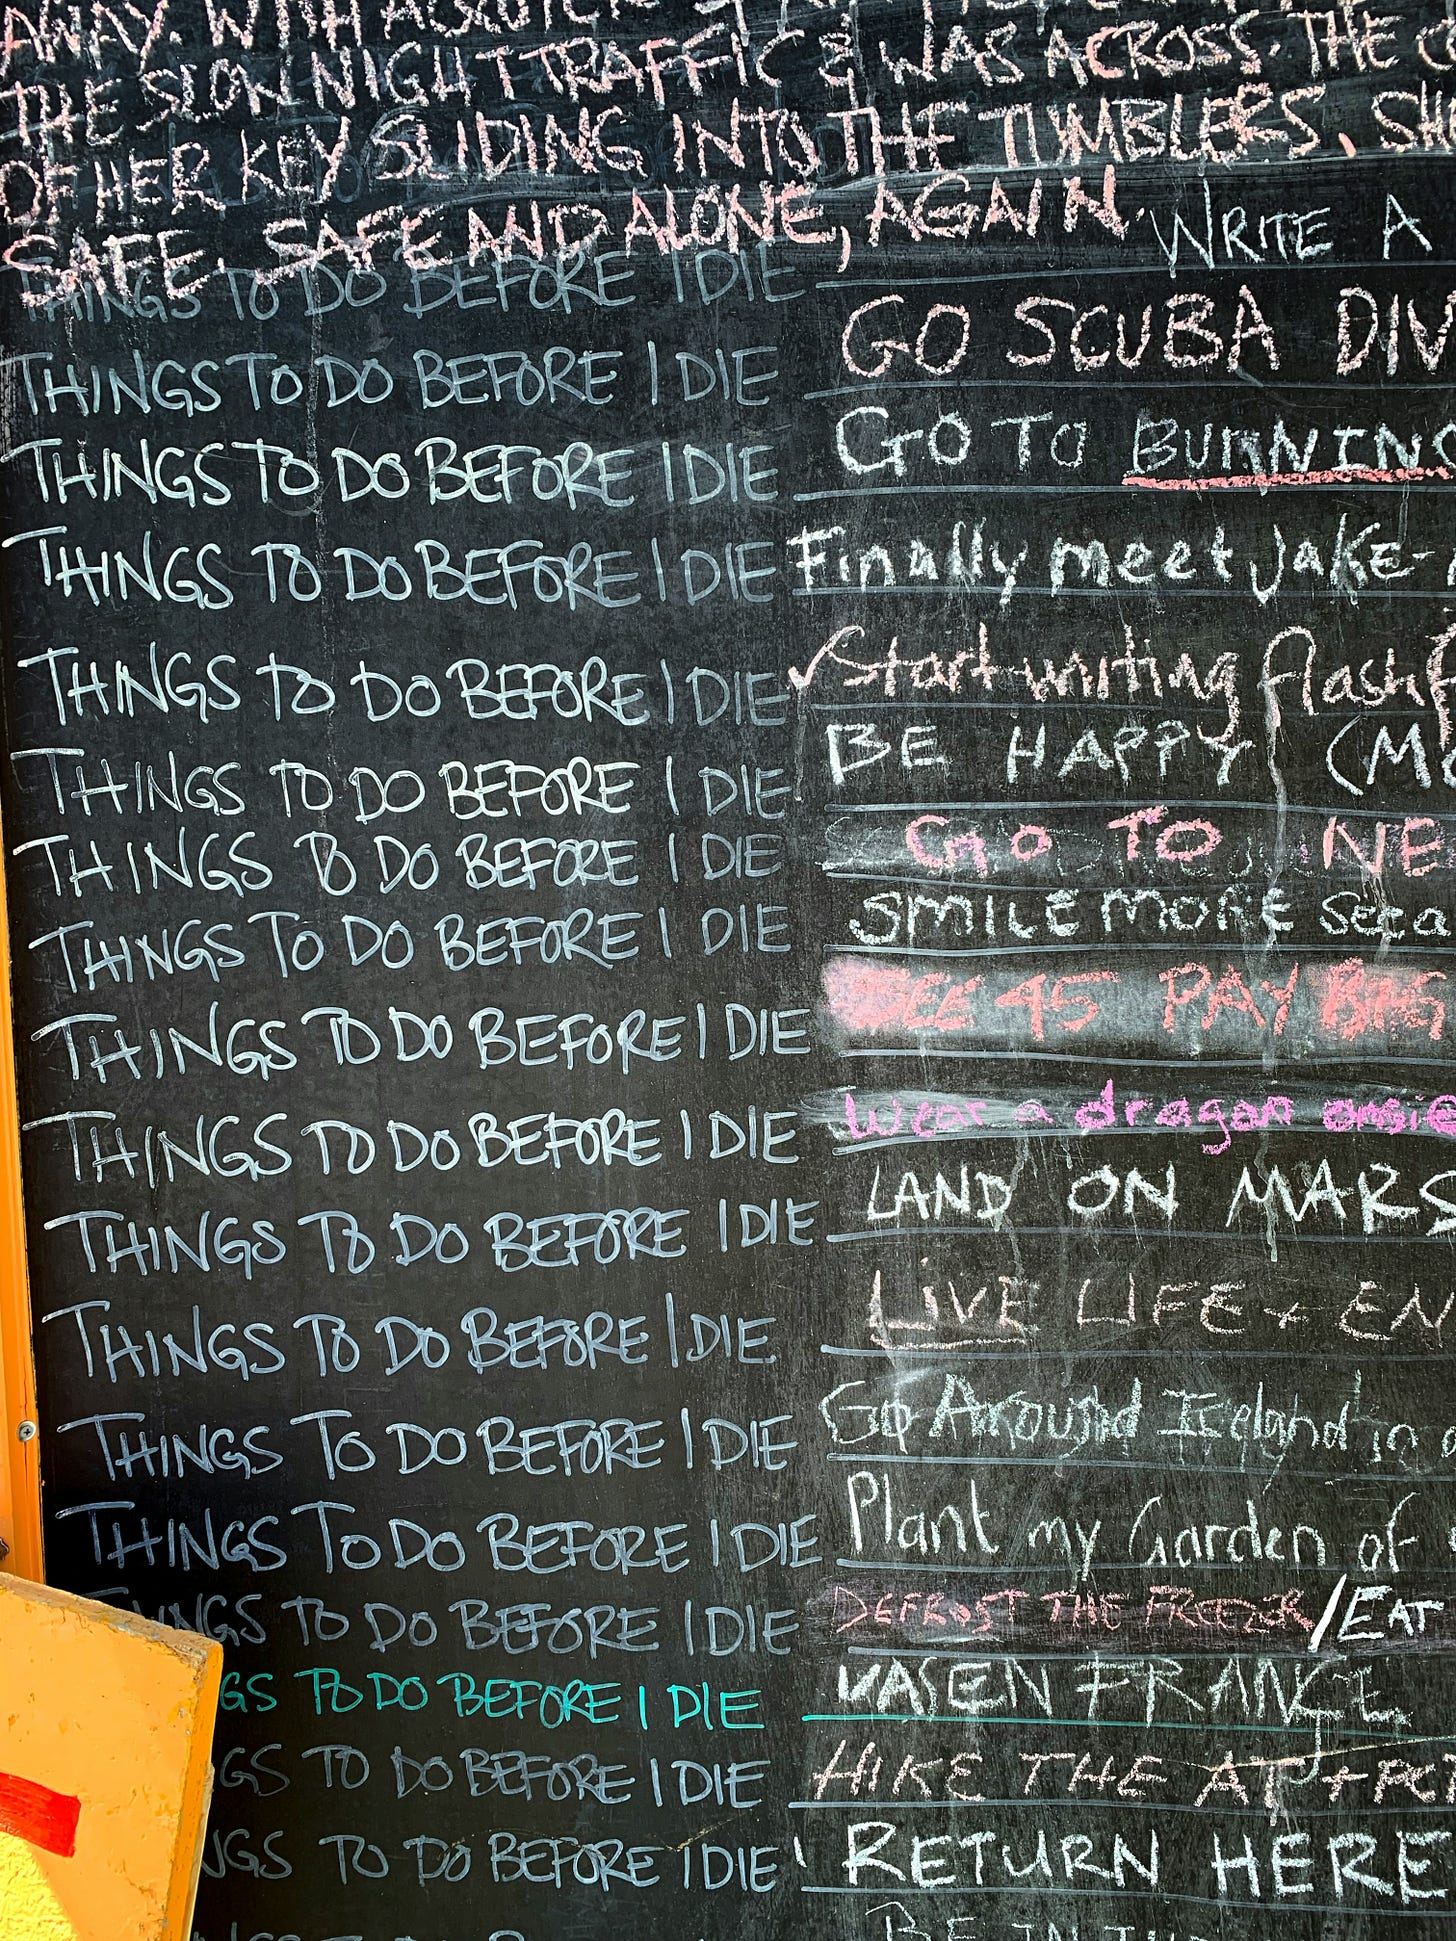 Lists on a chalkboard, including lots of "things to do before I die"